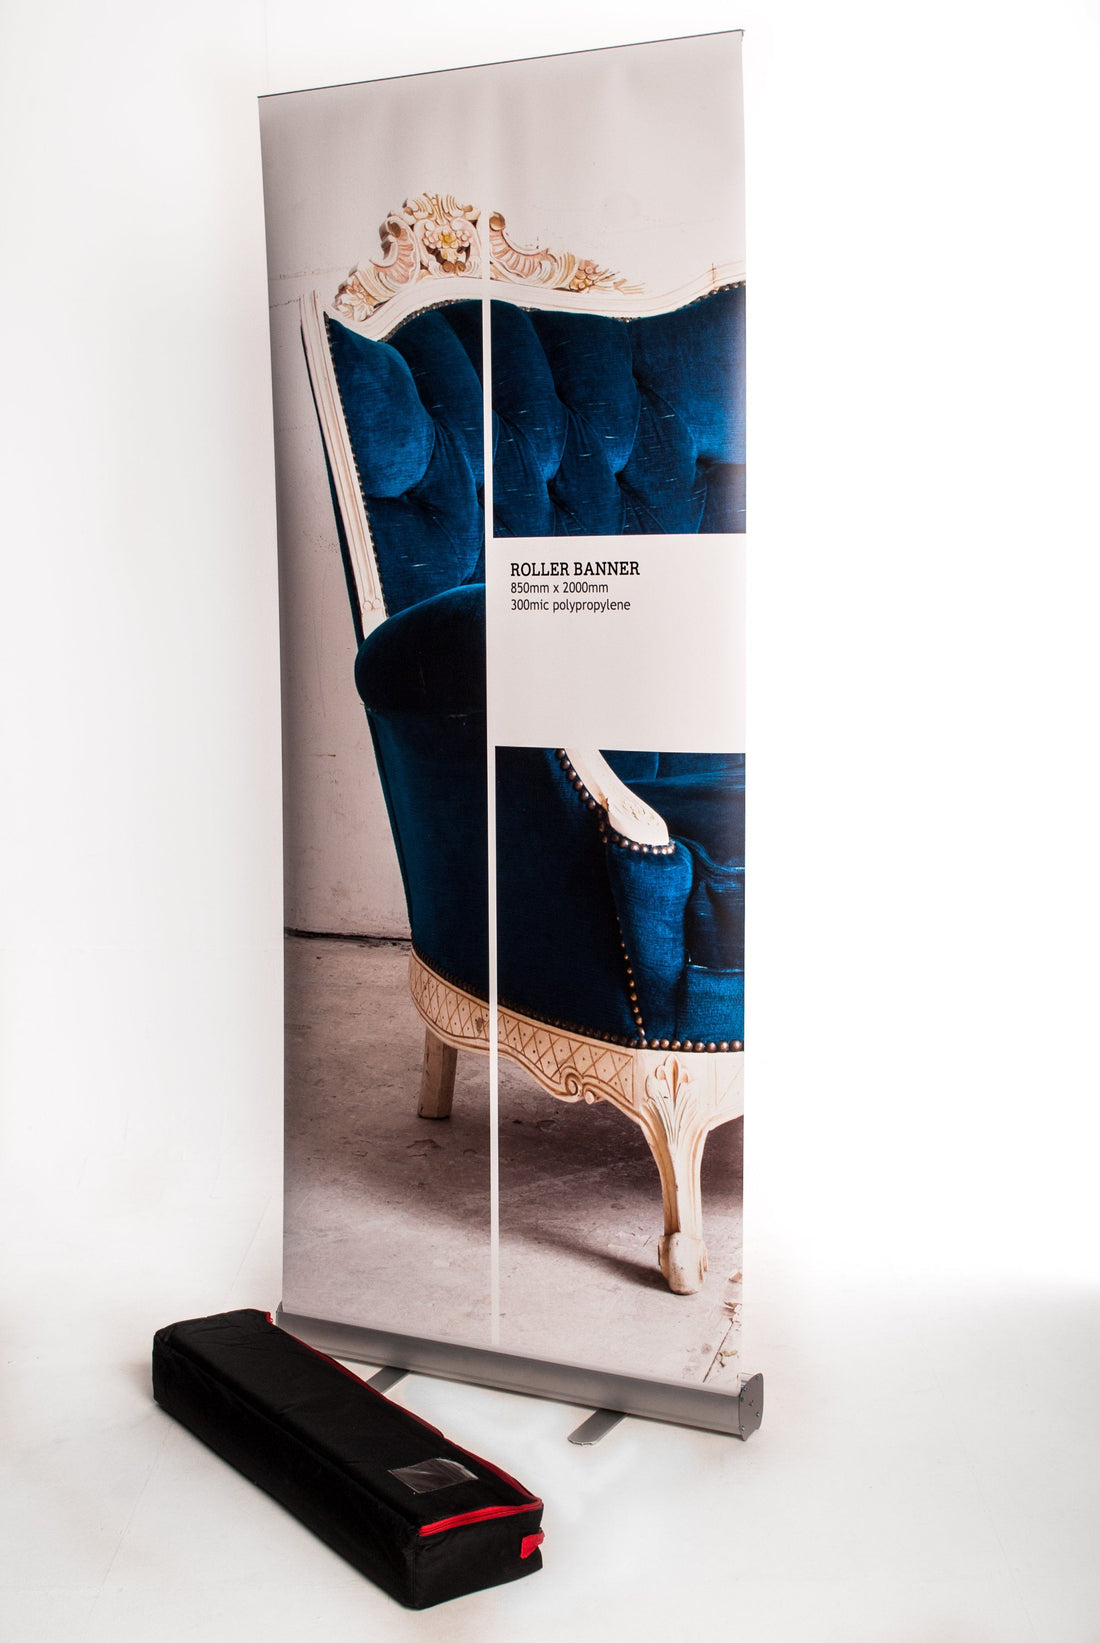 Did You Know? We Design & Print Roller Banners!